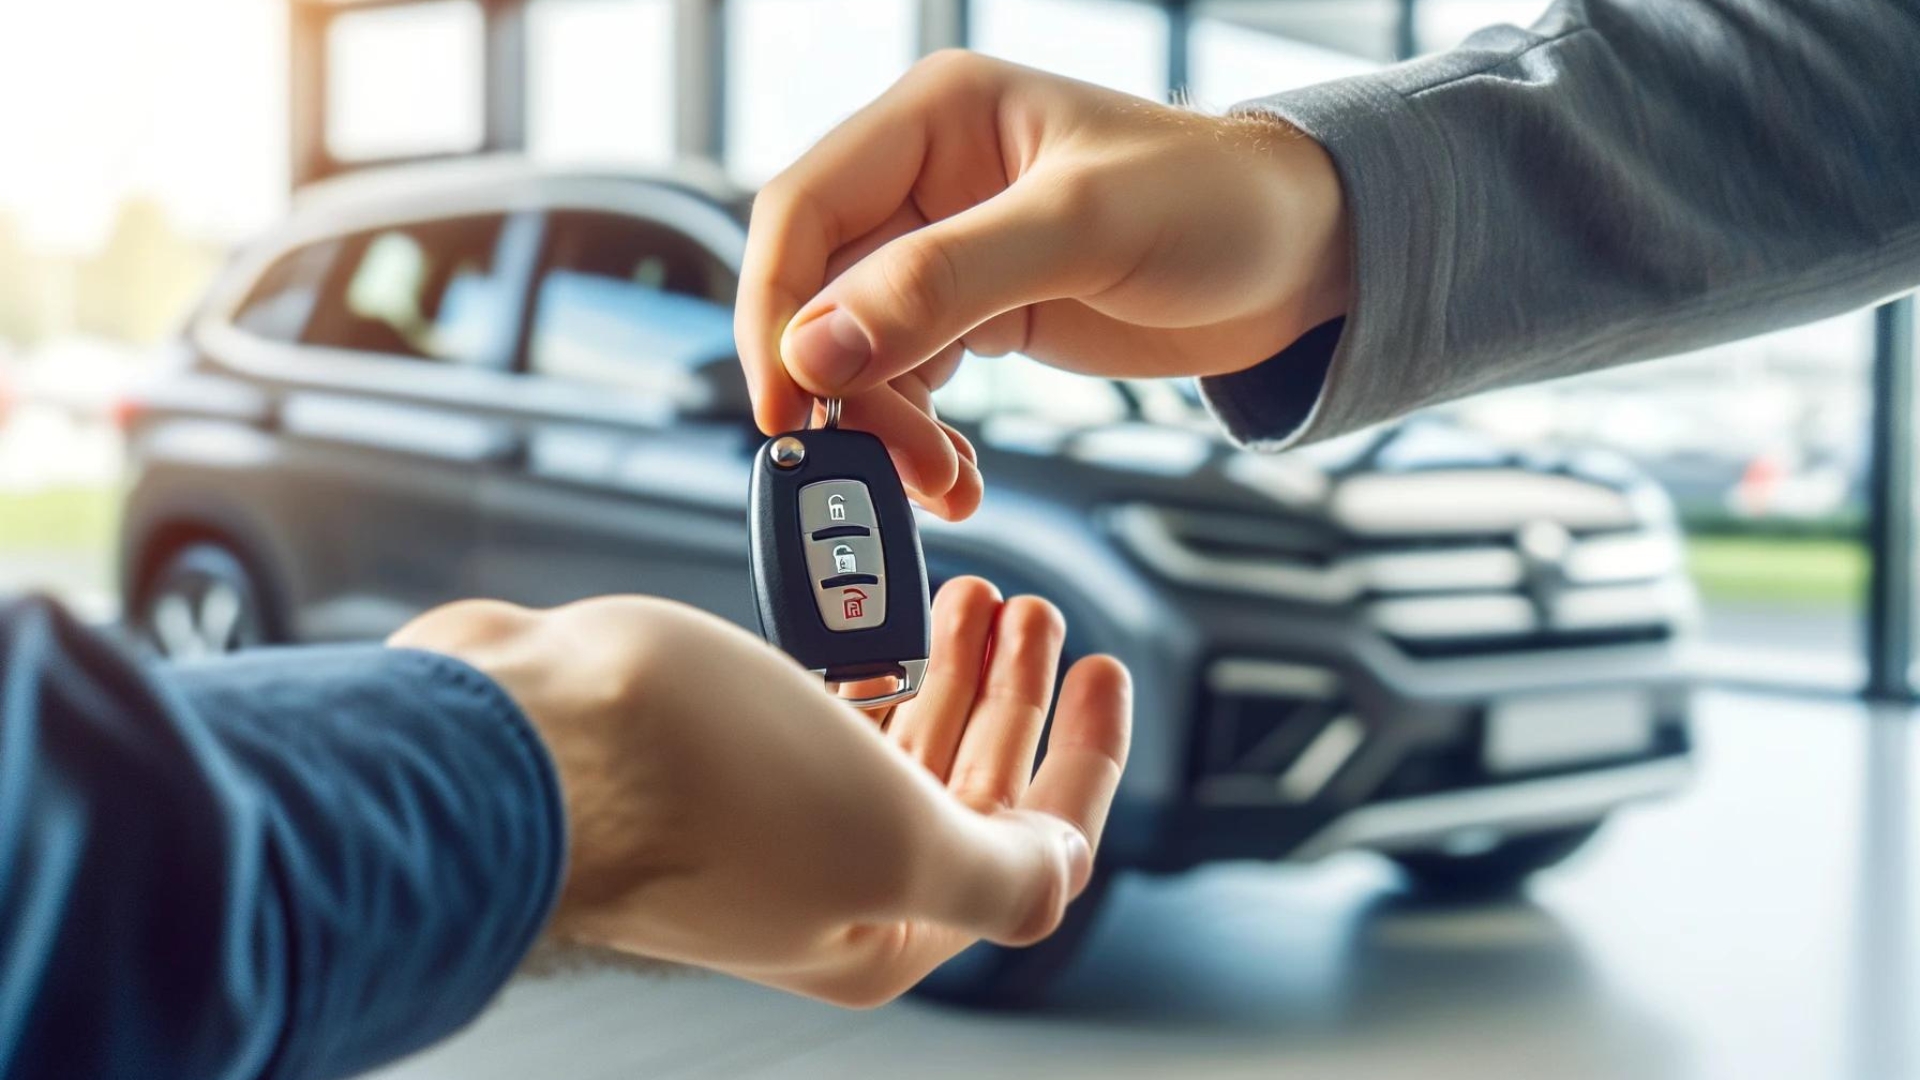 You can get a replacement push-to-start car key from a dealership or a trusted car locksmith near you.